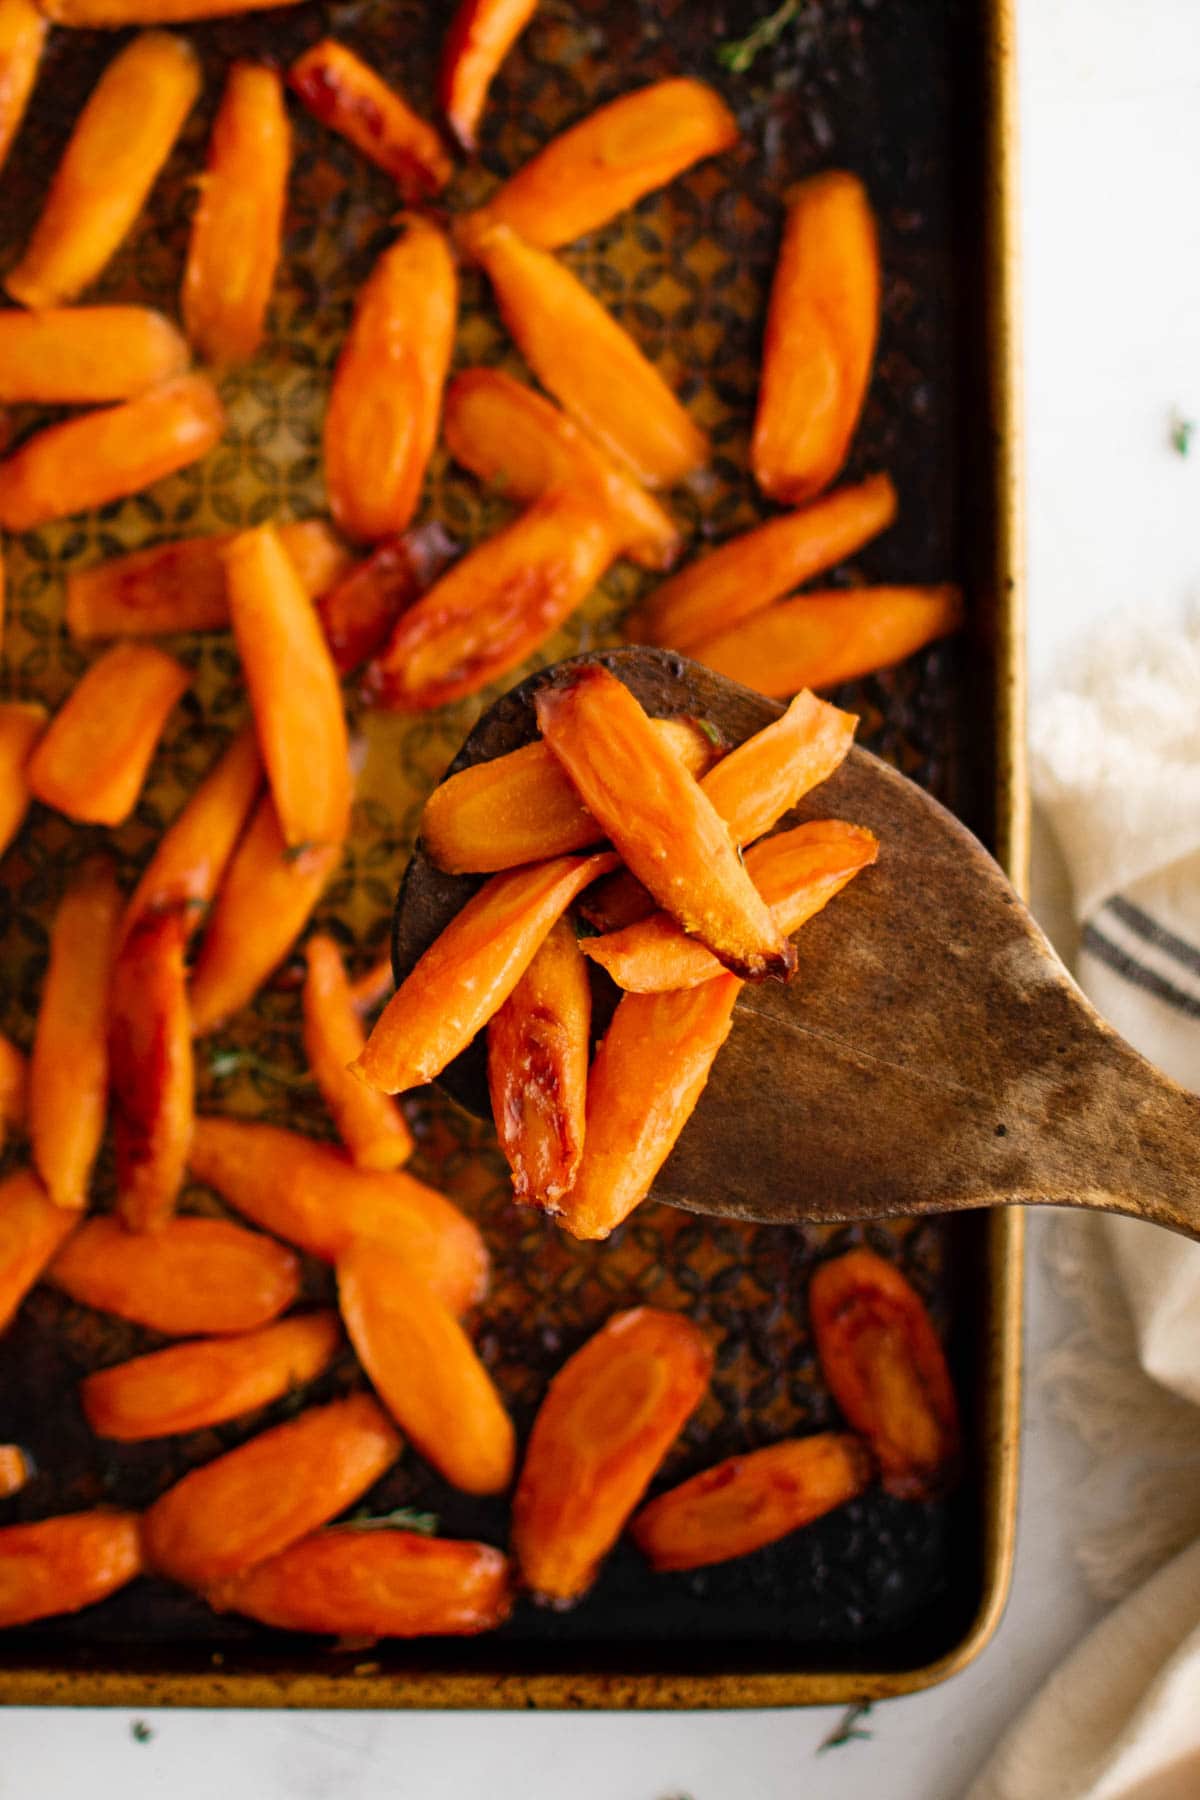 Roasted carrots on a baking sheet with a wooden spatula.